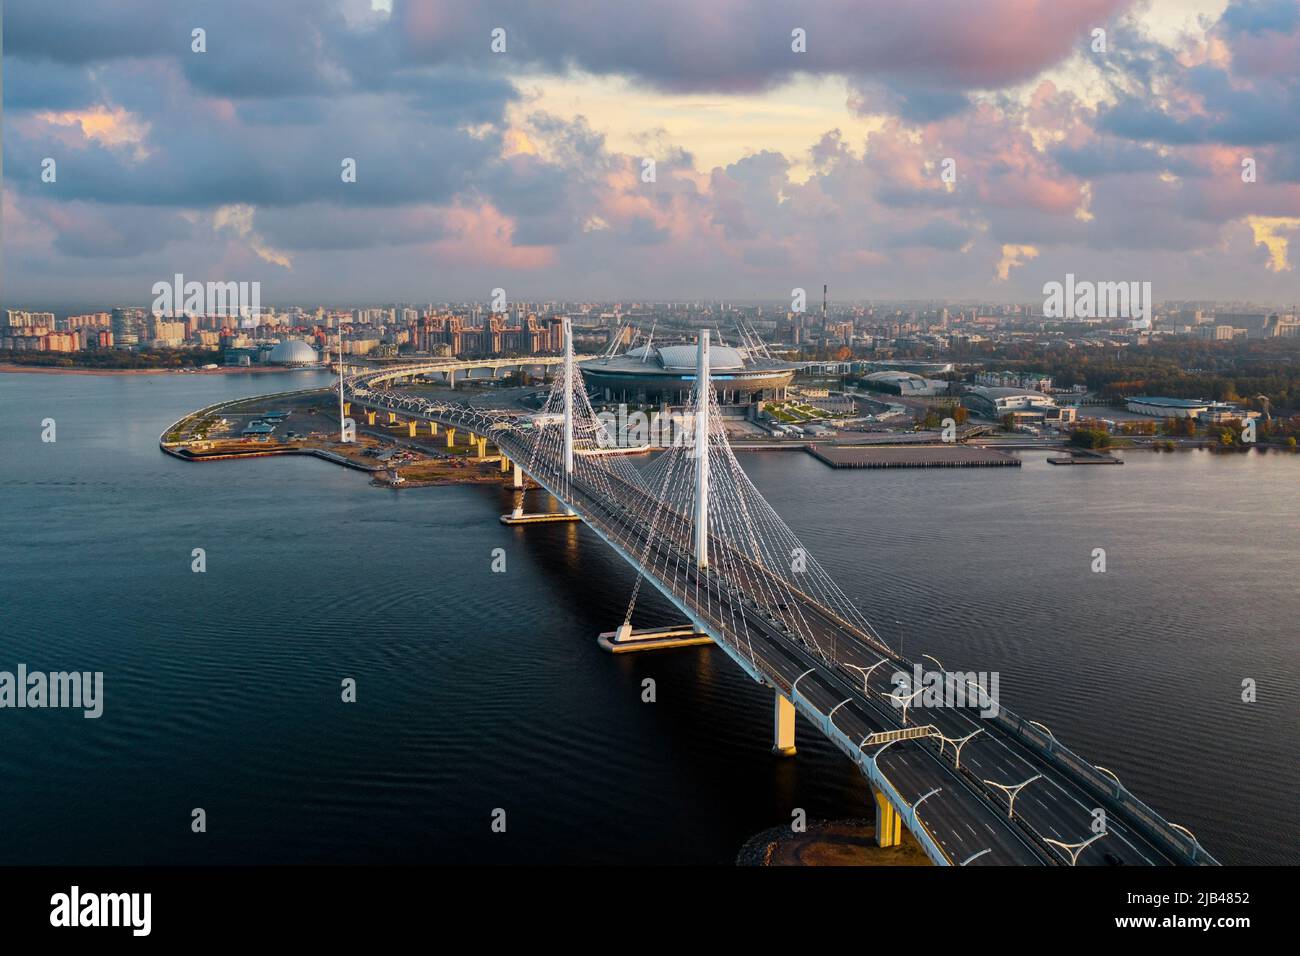 Aerial view of the Gulf of Finland, Saint-Petersburg, Russia, with a stadium, western rapid diameter and cable-stayed bridge Stock Photo